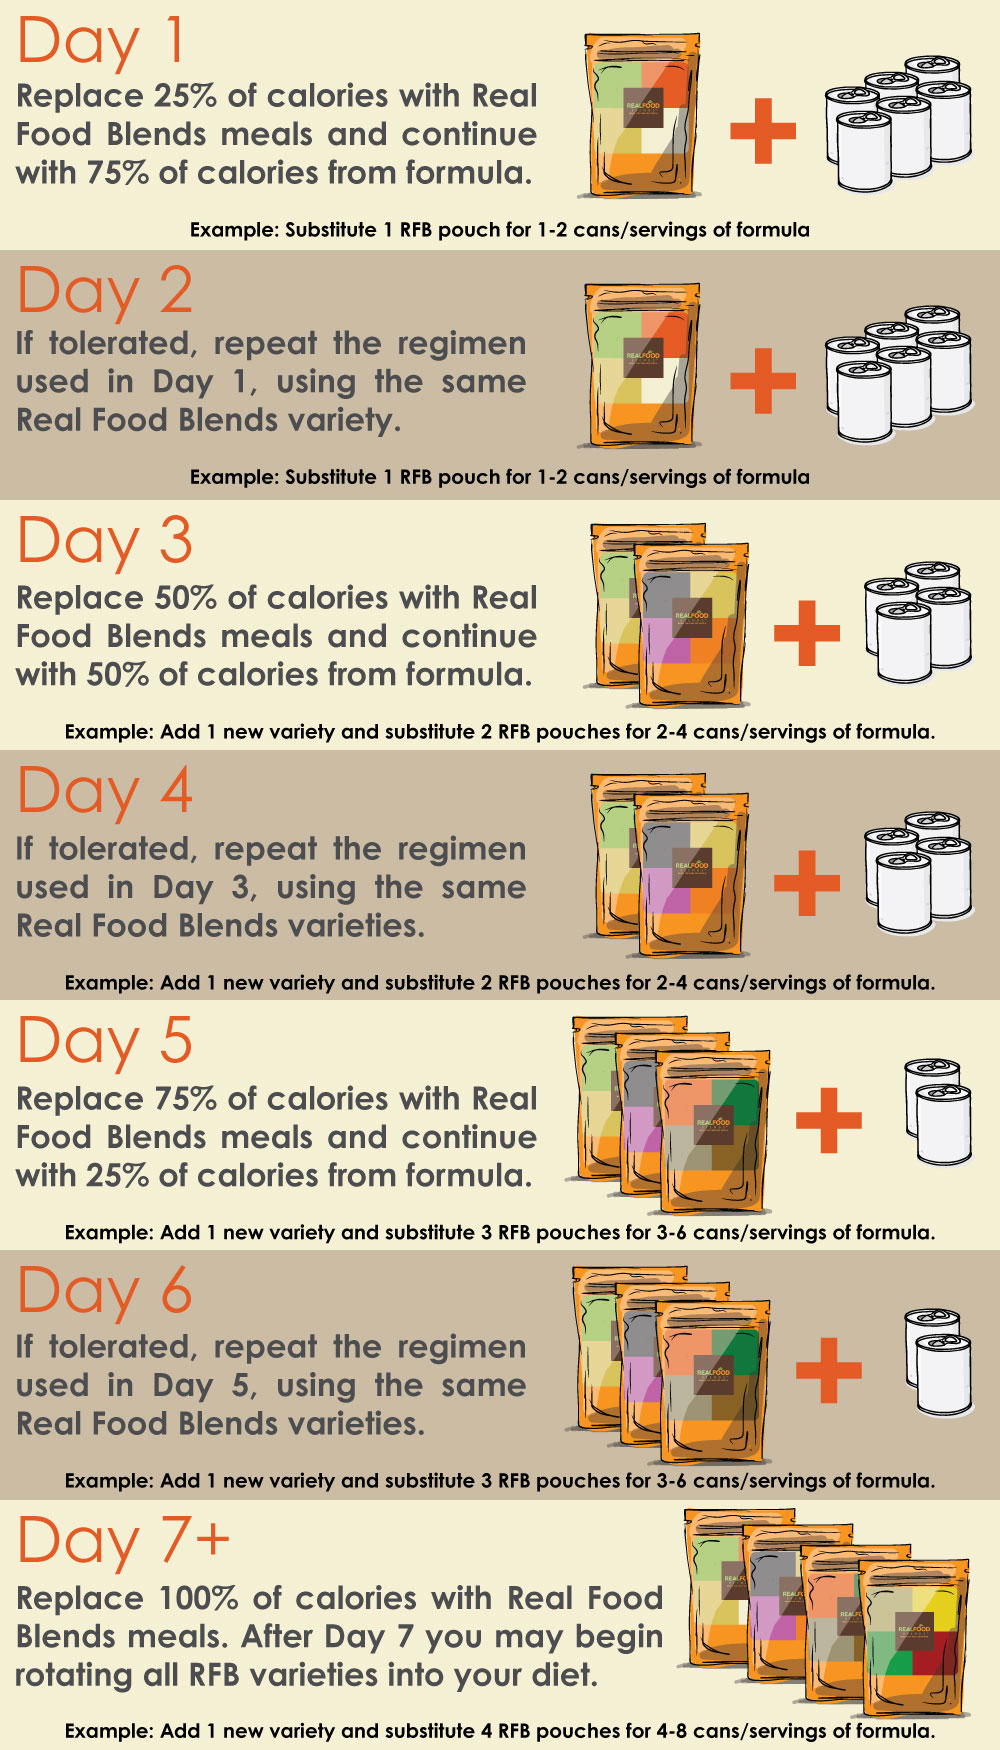 https://www.realfoodblends.com/wp-content/uploads/2019/01/RFB_infograph_transition.jpg